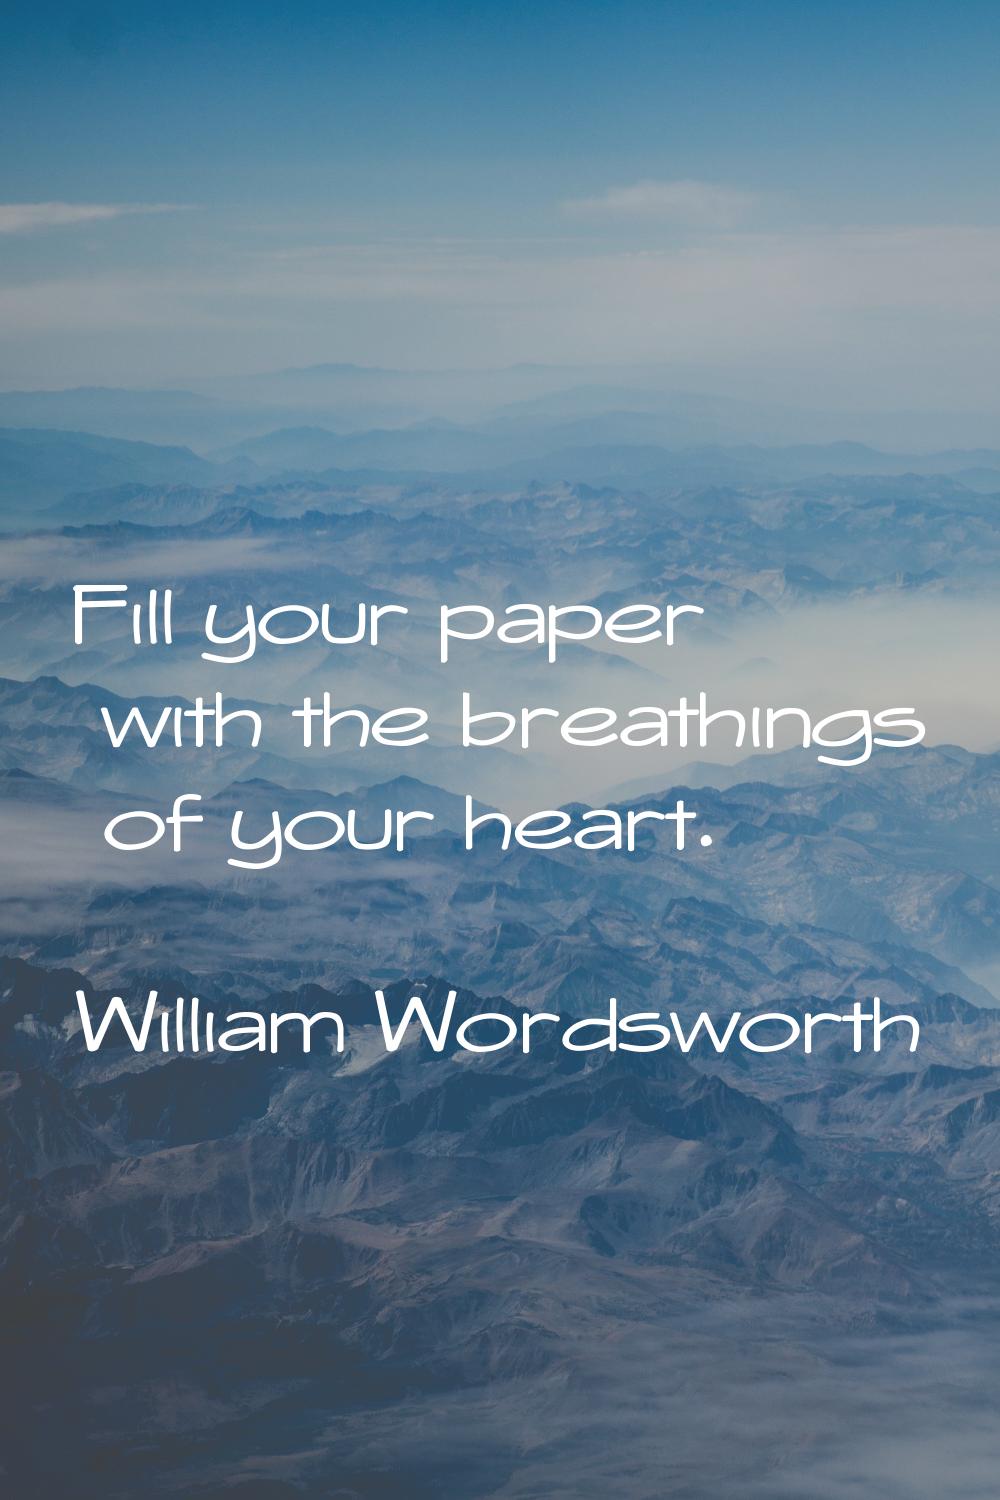 Fill your paper with the breathings of your heart.